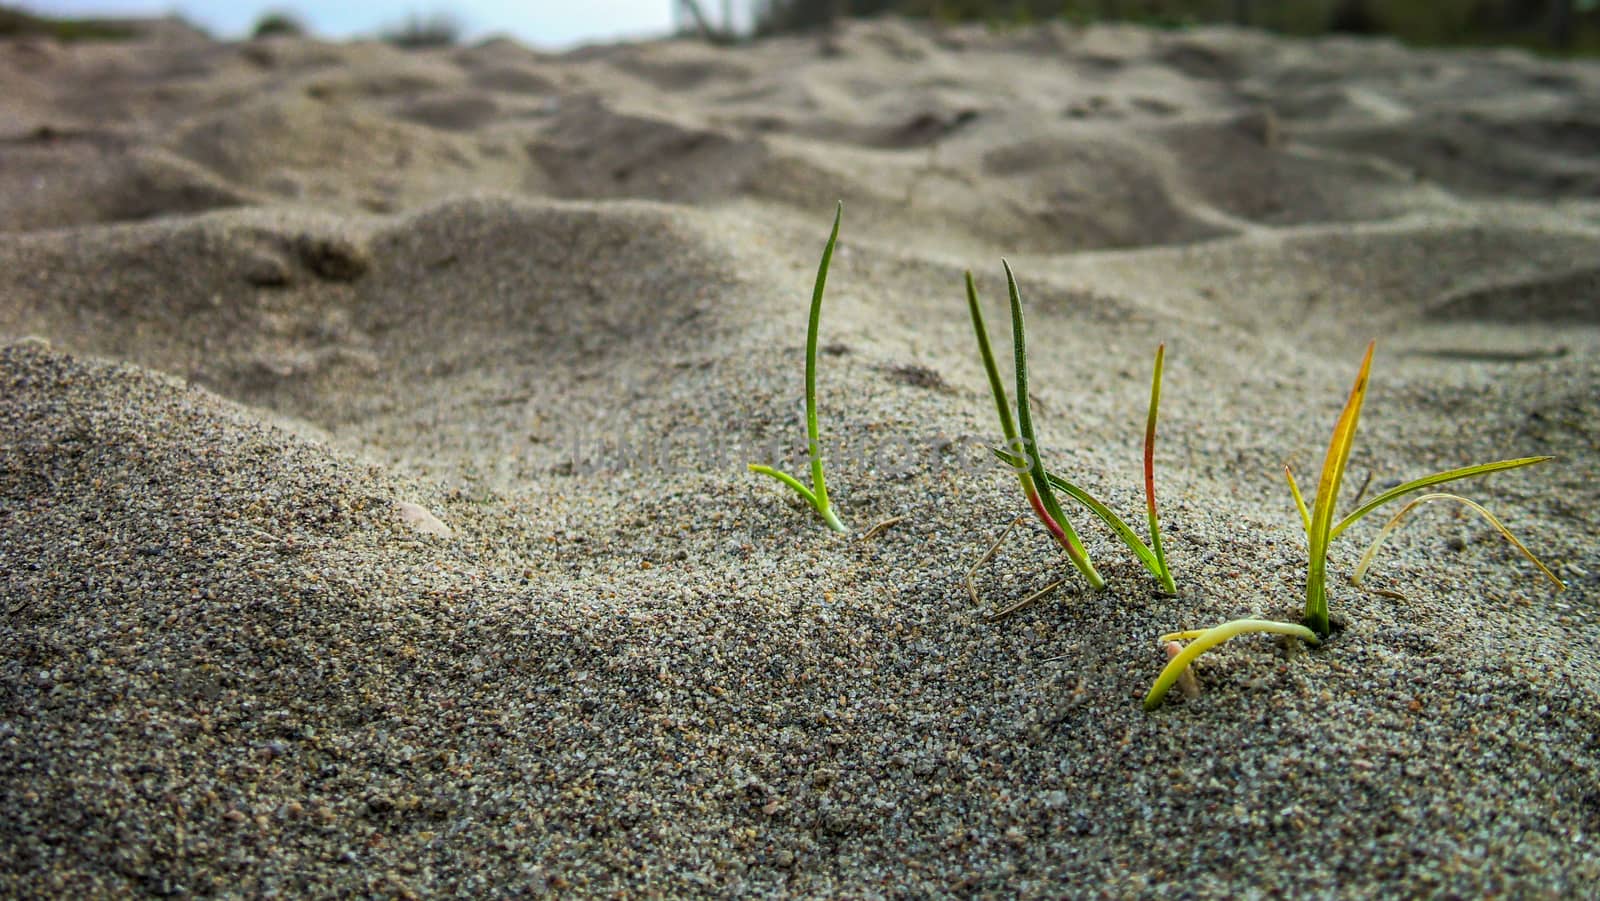 Small tufts of grass growing on the sand of a beach. Small detail of a natural wonder.